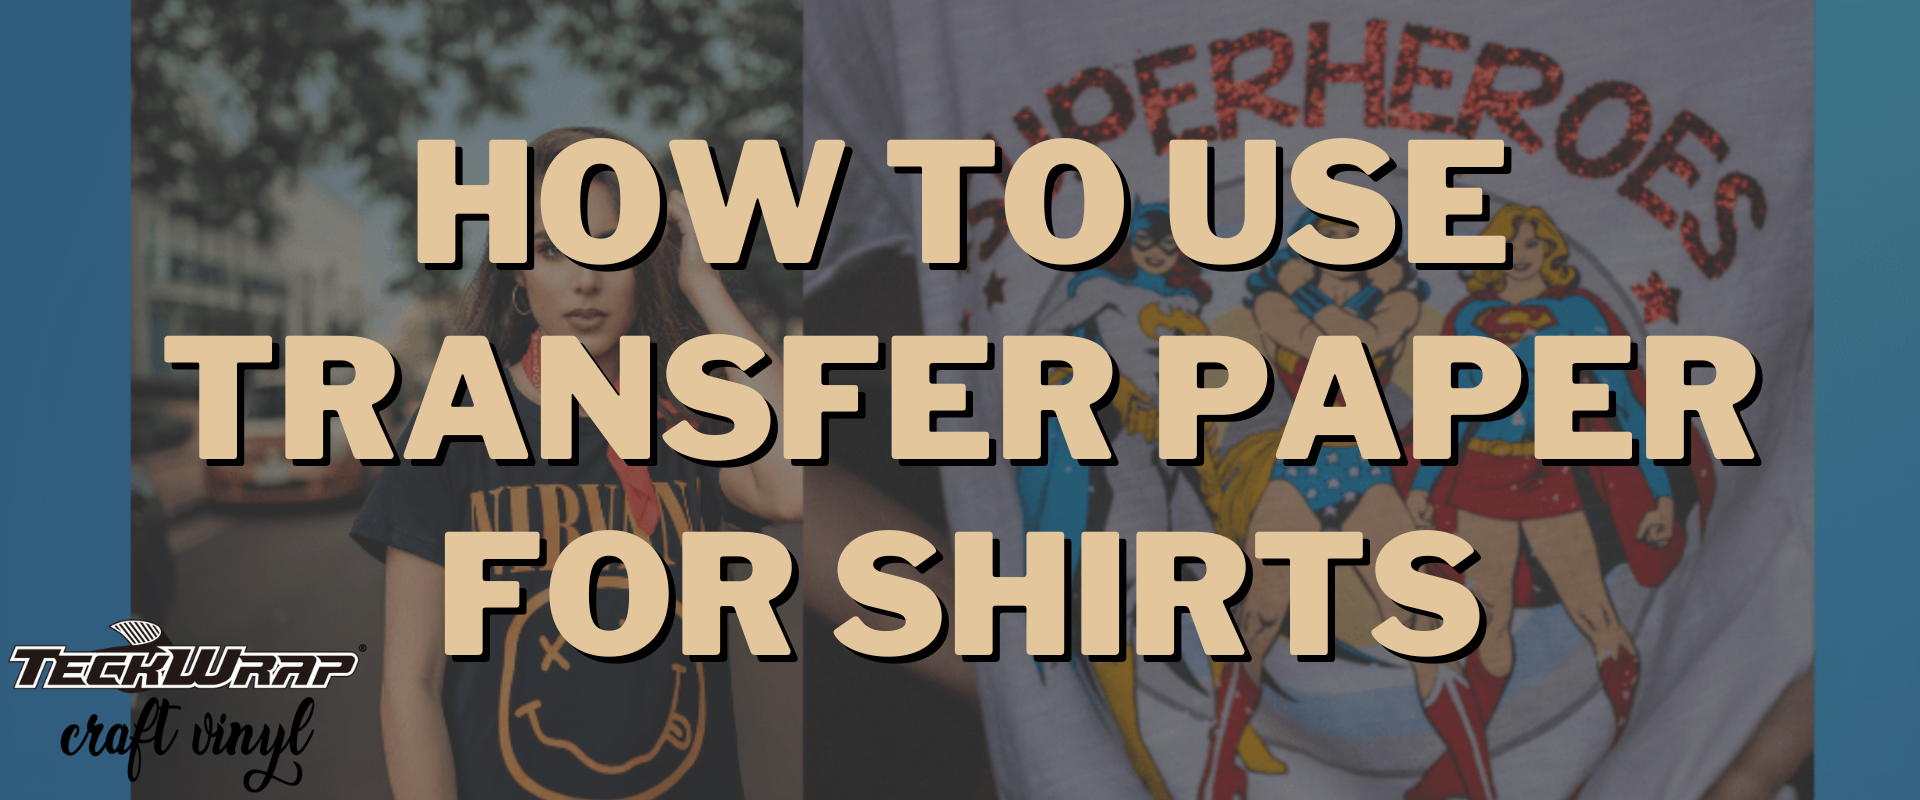 How To Use Heat Transfer Paper: A Step-by-Step Guide